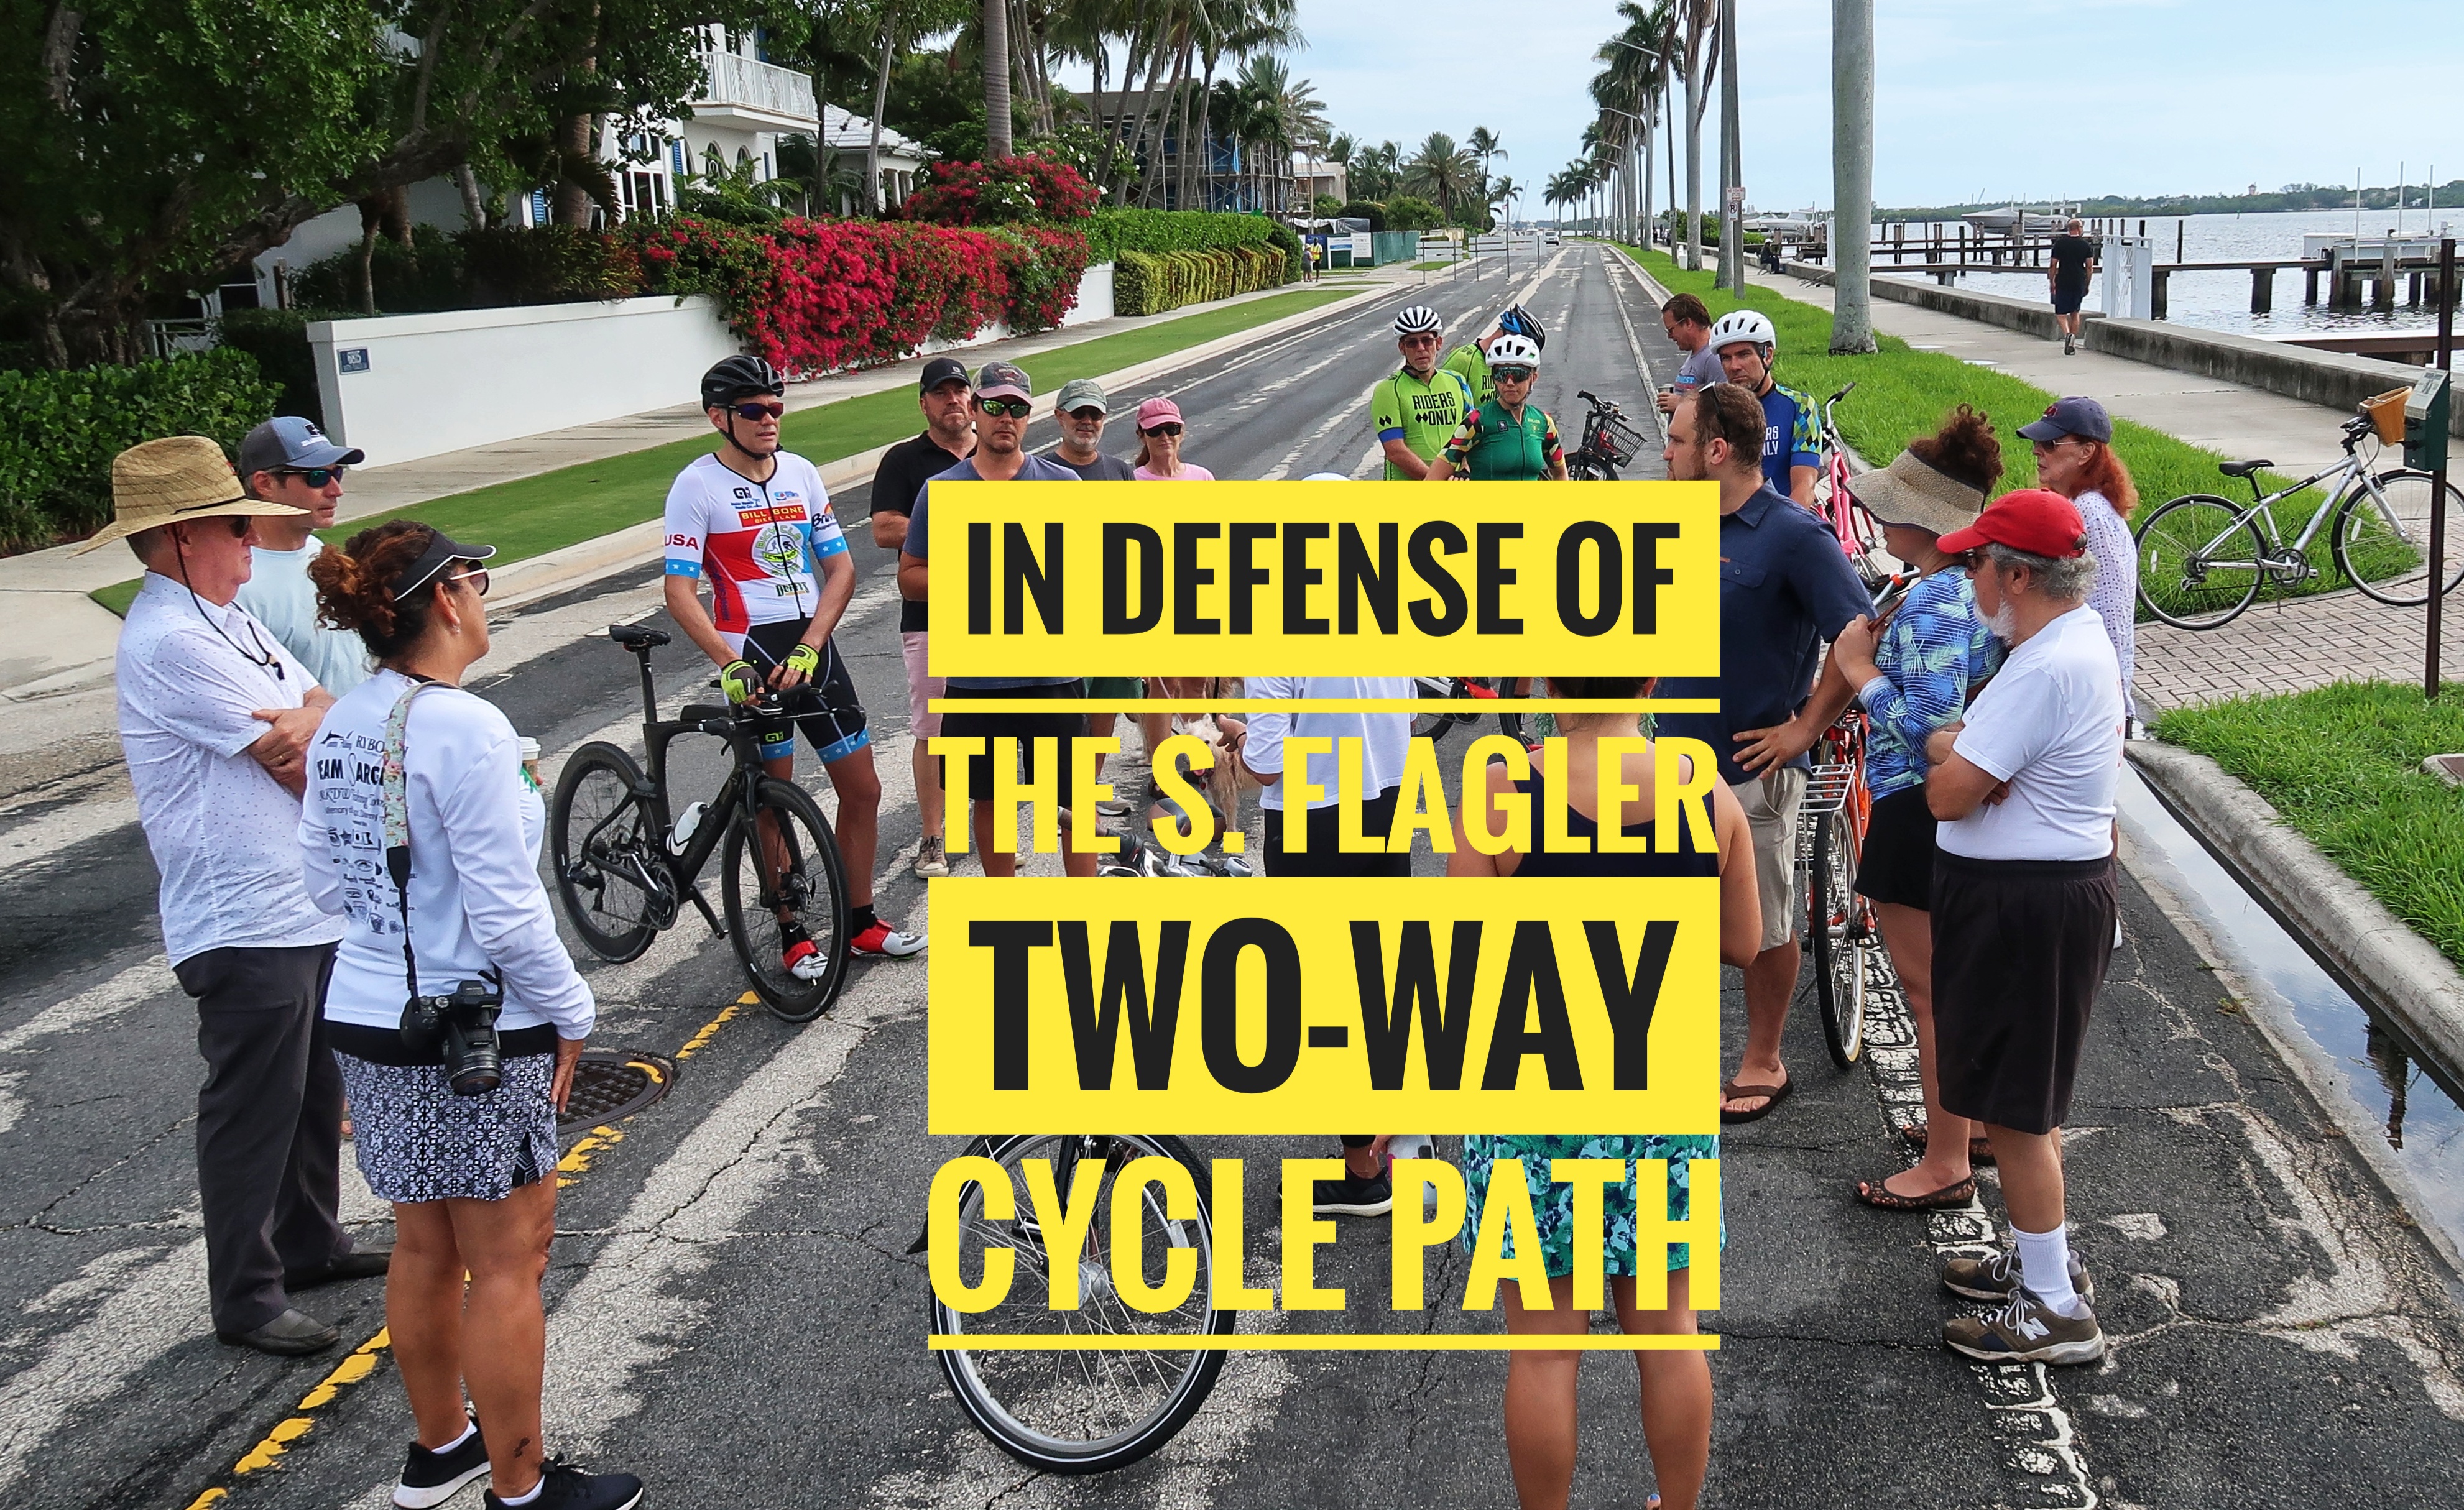 In defense of the S. Flagler Two-Way Cycle Track